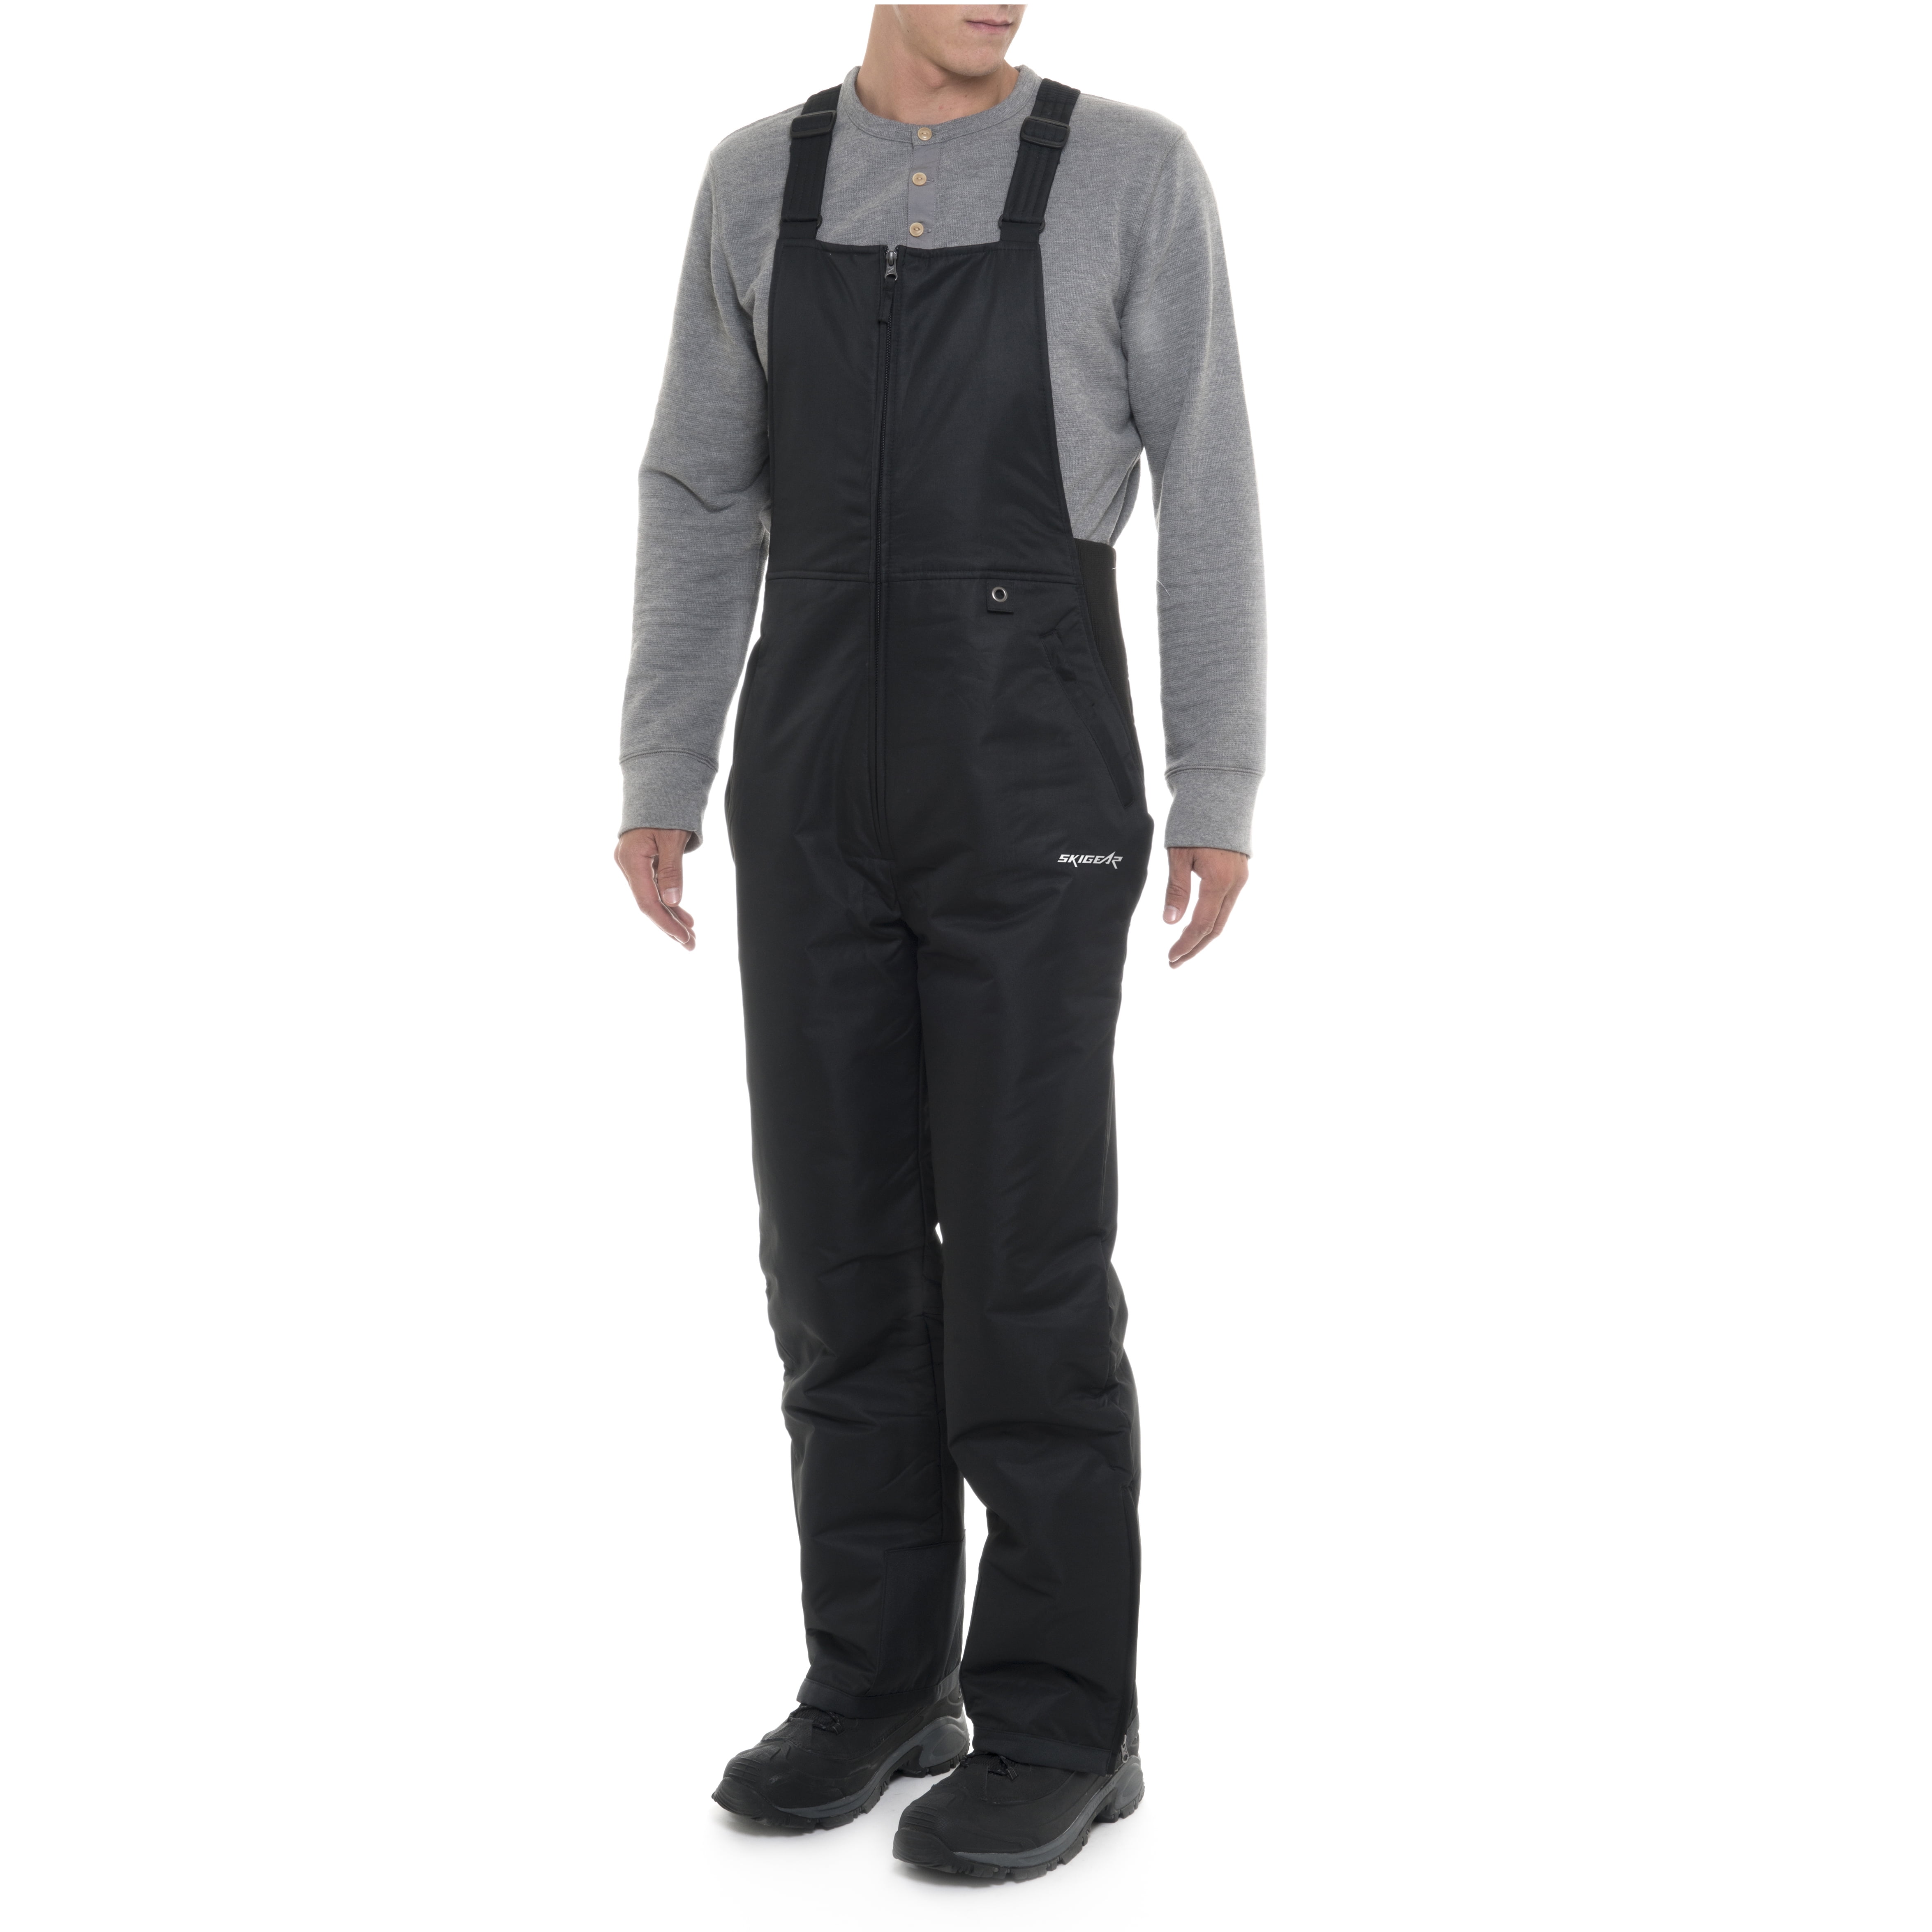 Snow Overalls for Men Essential Insulated Bib Overalls Waterproof Breathable Ski Pants